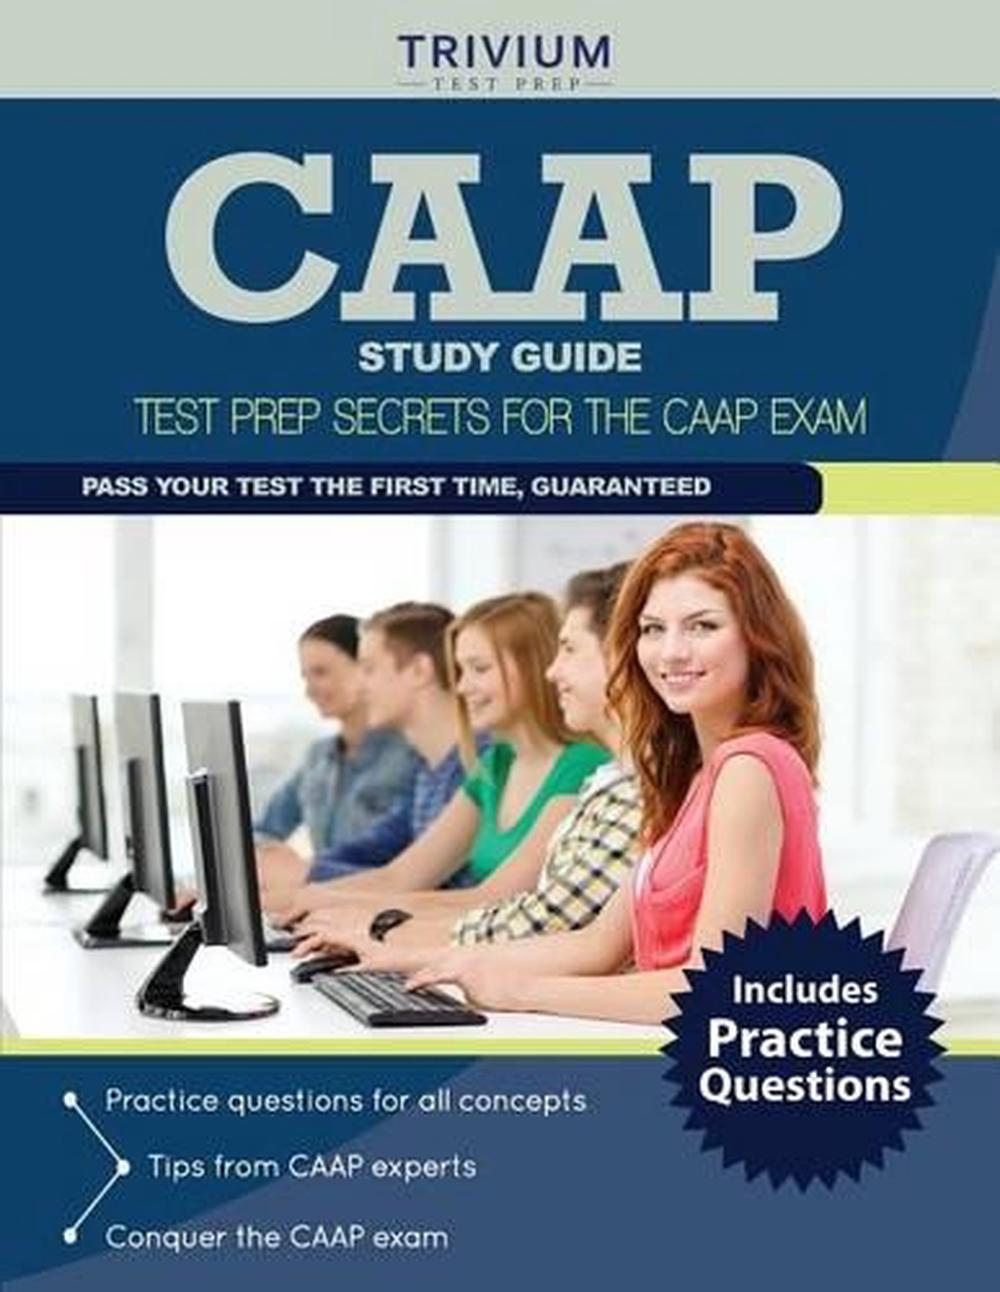 Caap Study Guide Test Prep Secrets for the Caap Exam by Trivium Test